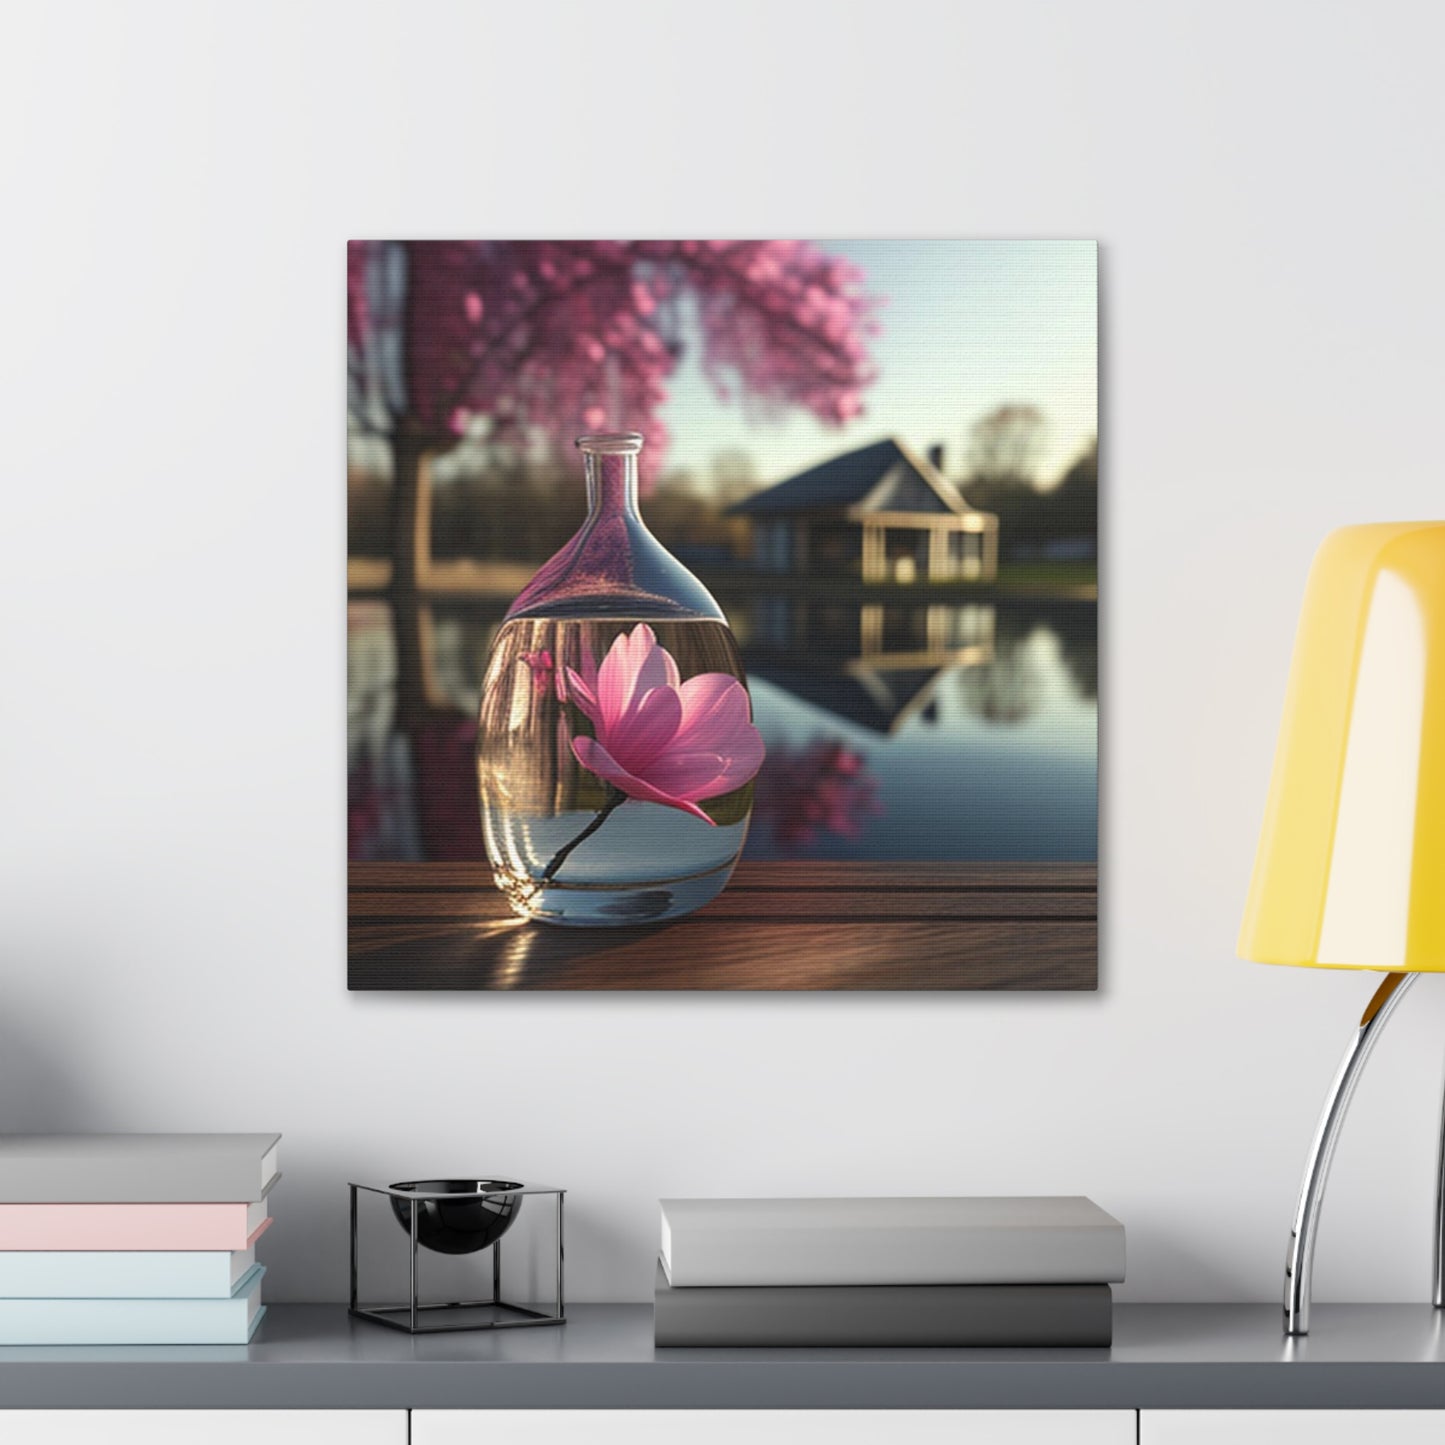 Canvas Gallery Wraps Magnolia in a Glass vase 2